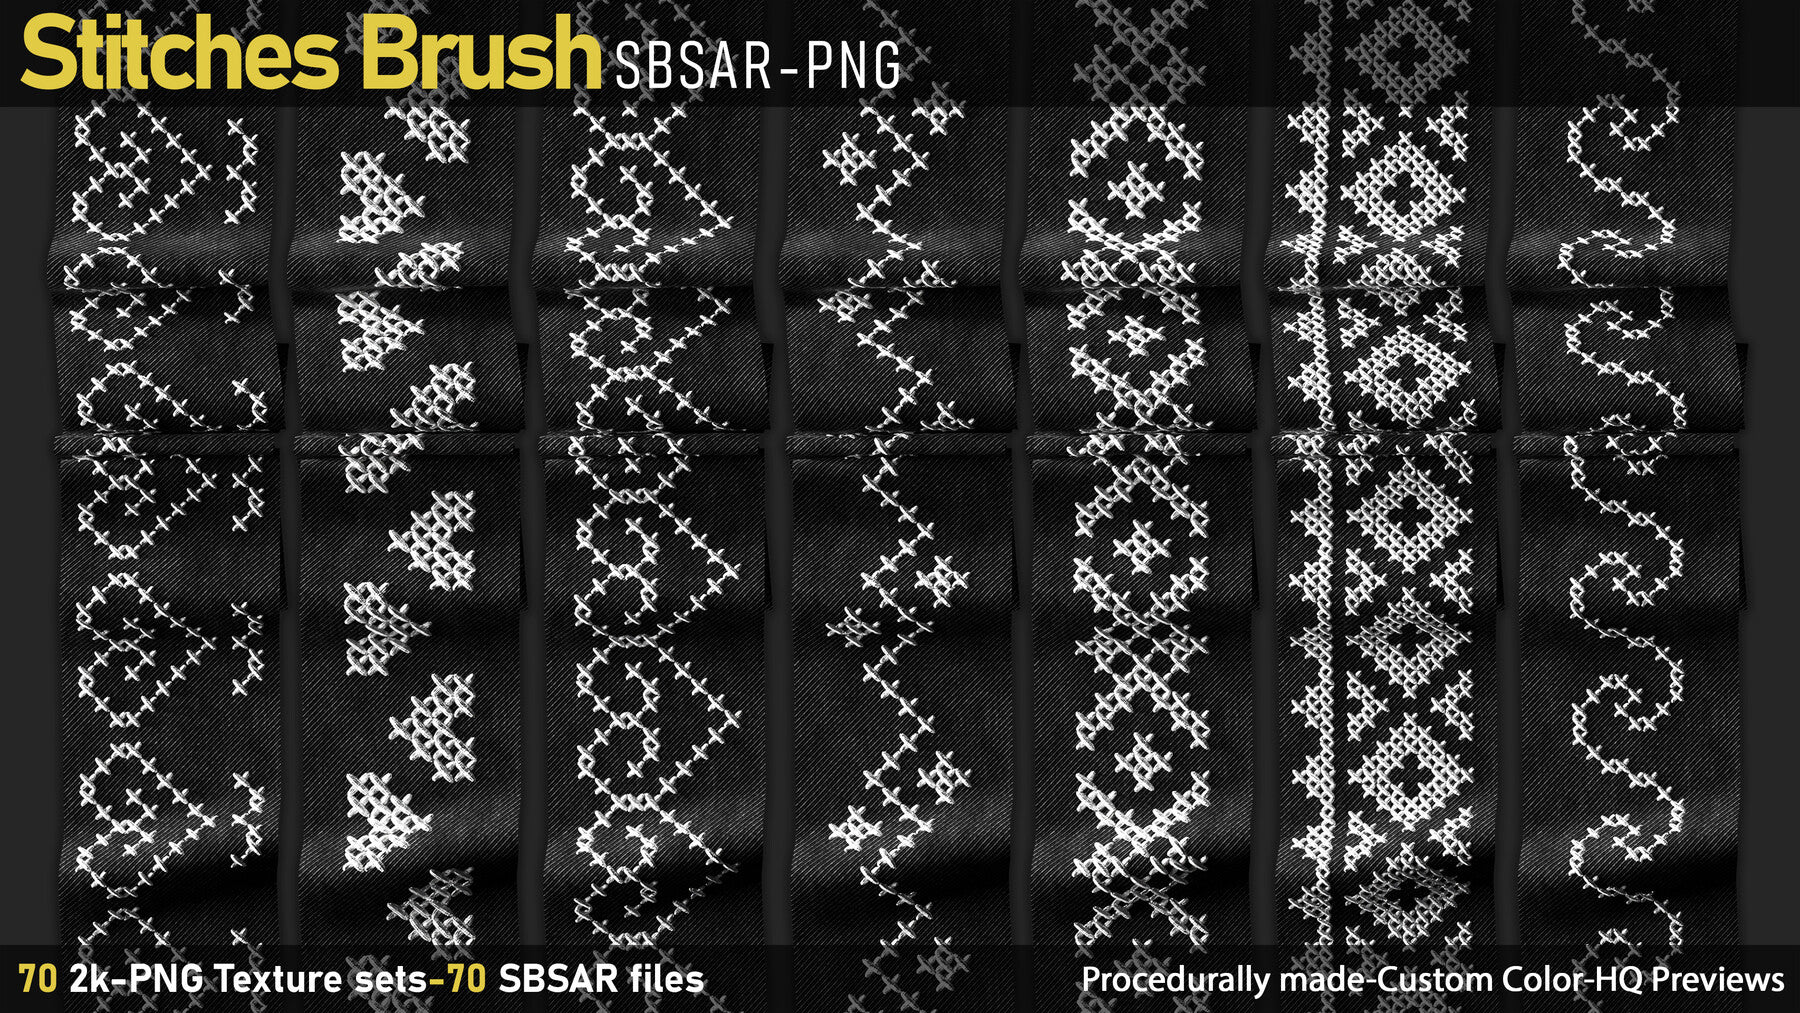 Stitches Brush - PNG and SBSAR